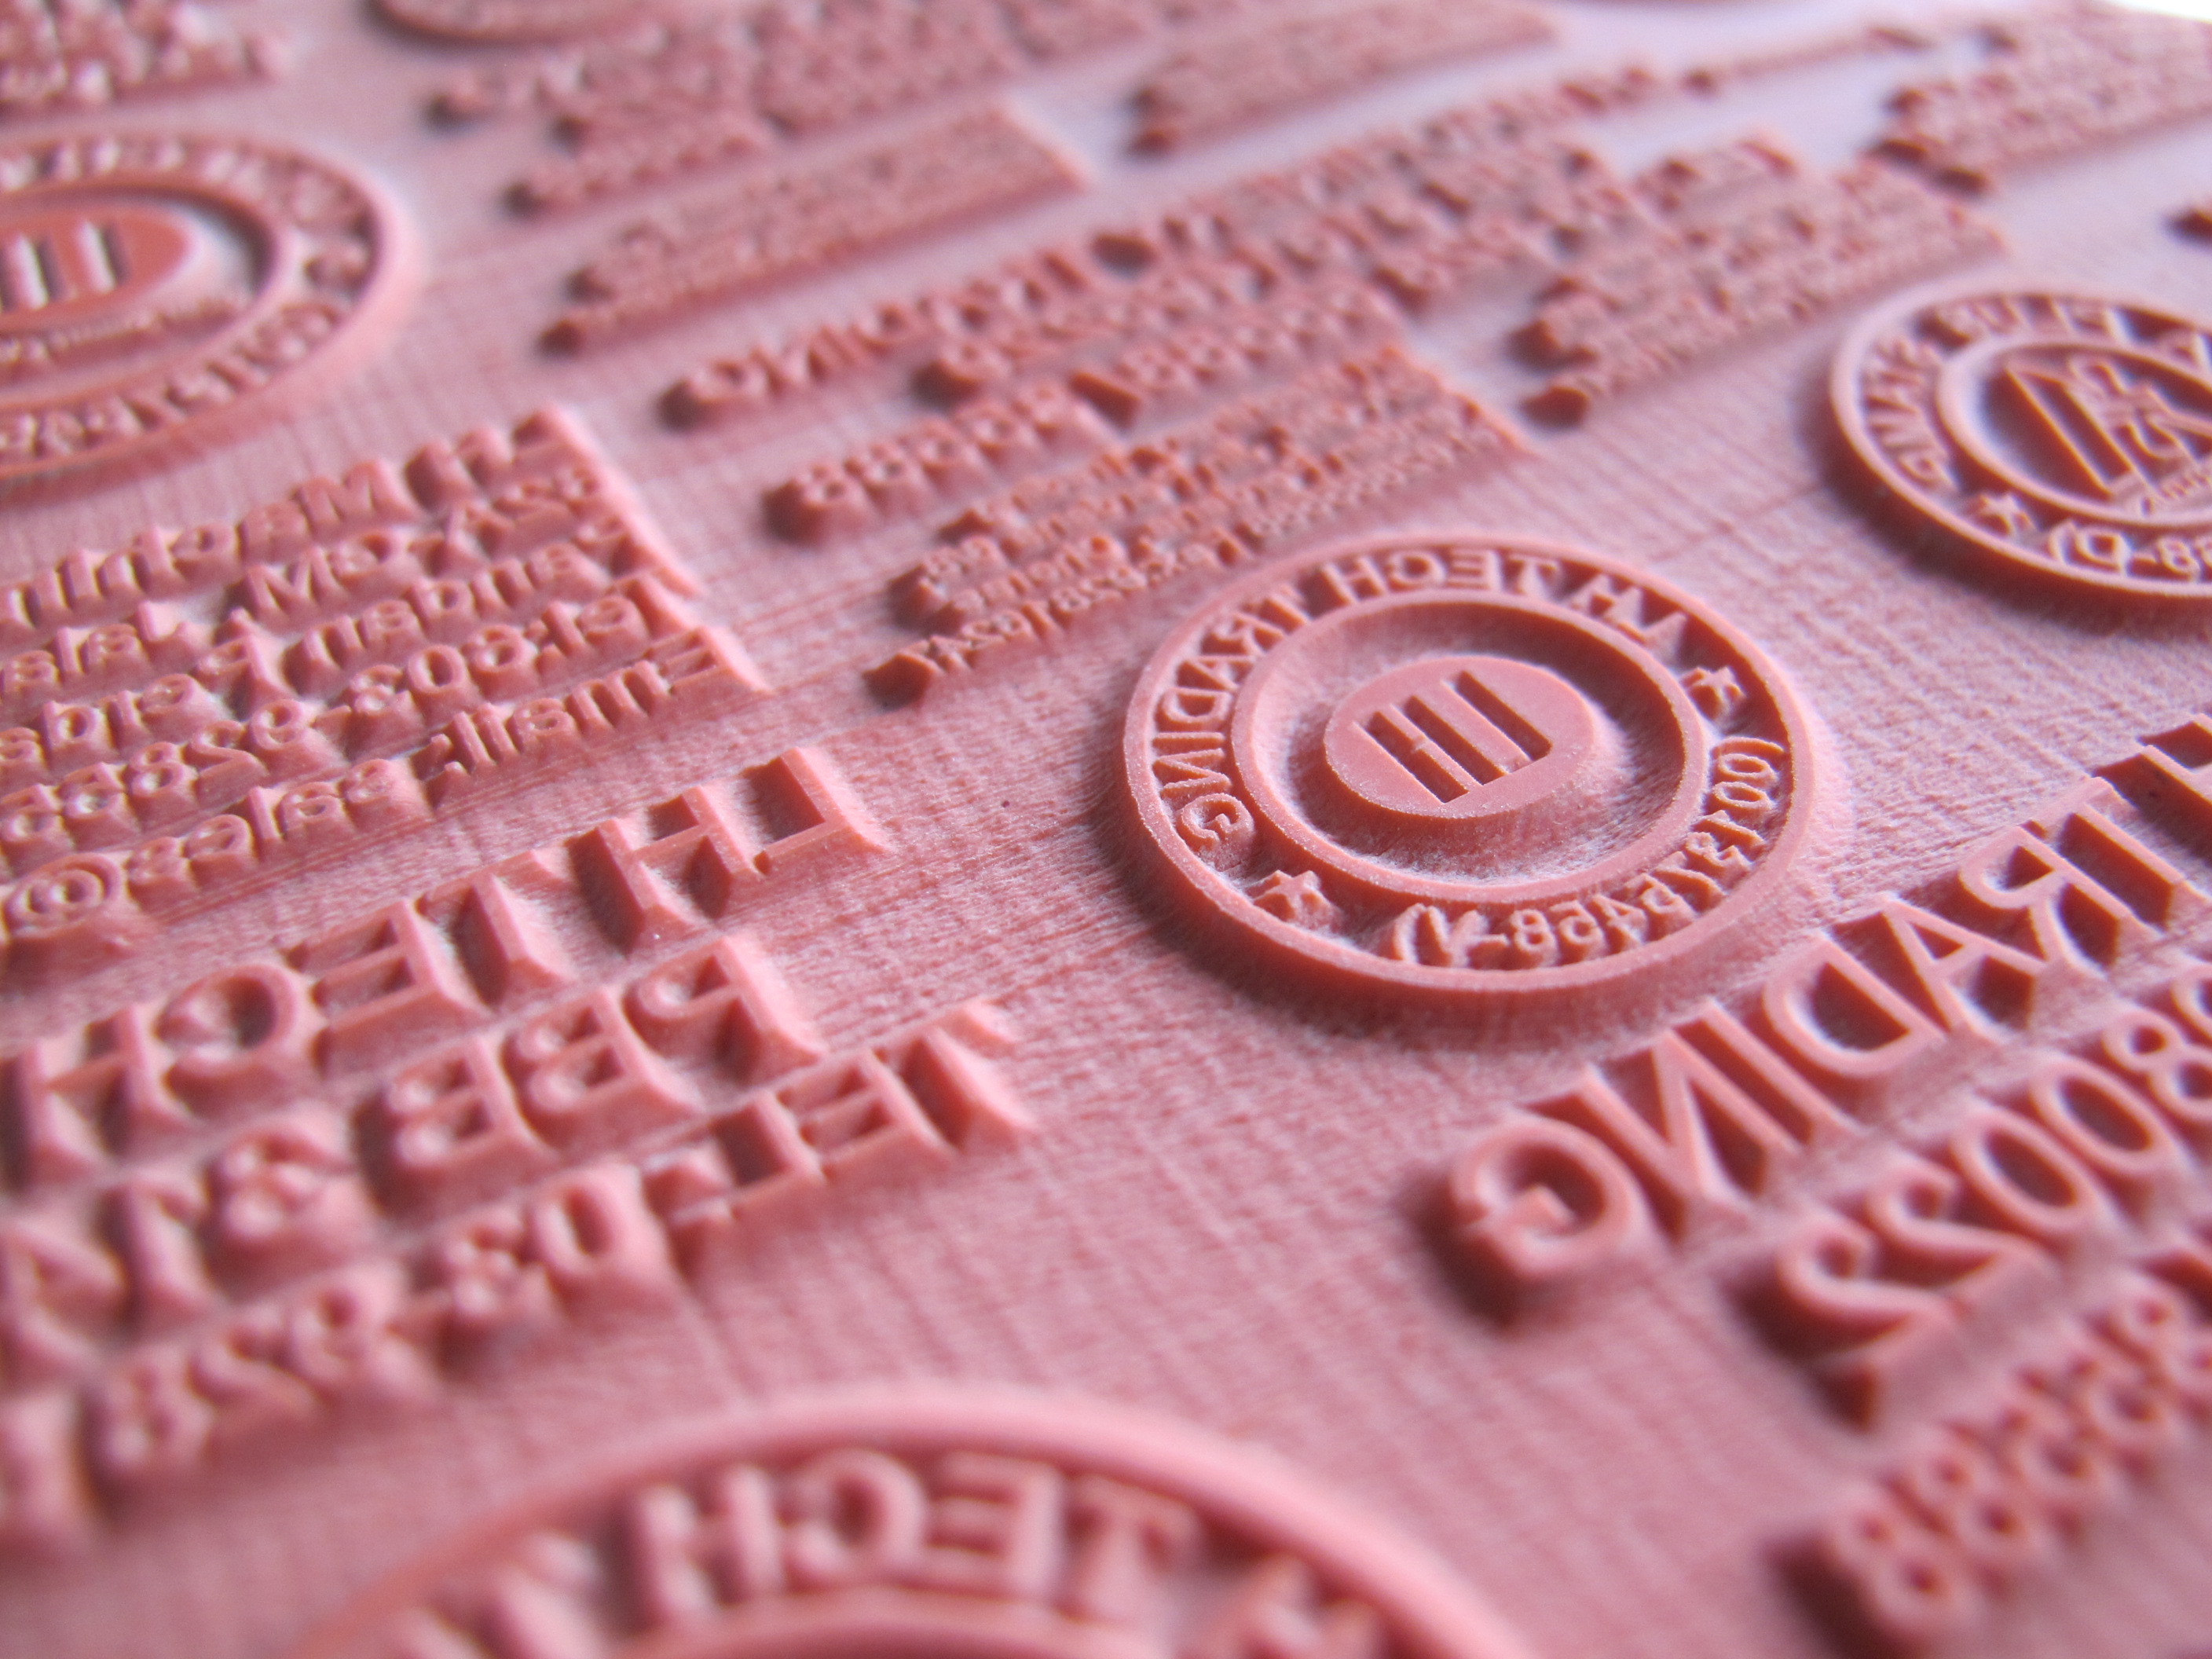 China laserable odorless red rubber stamp - engraved result